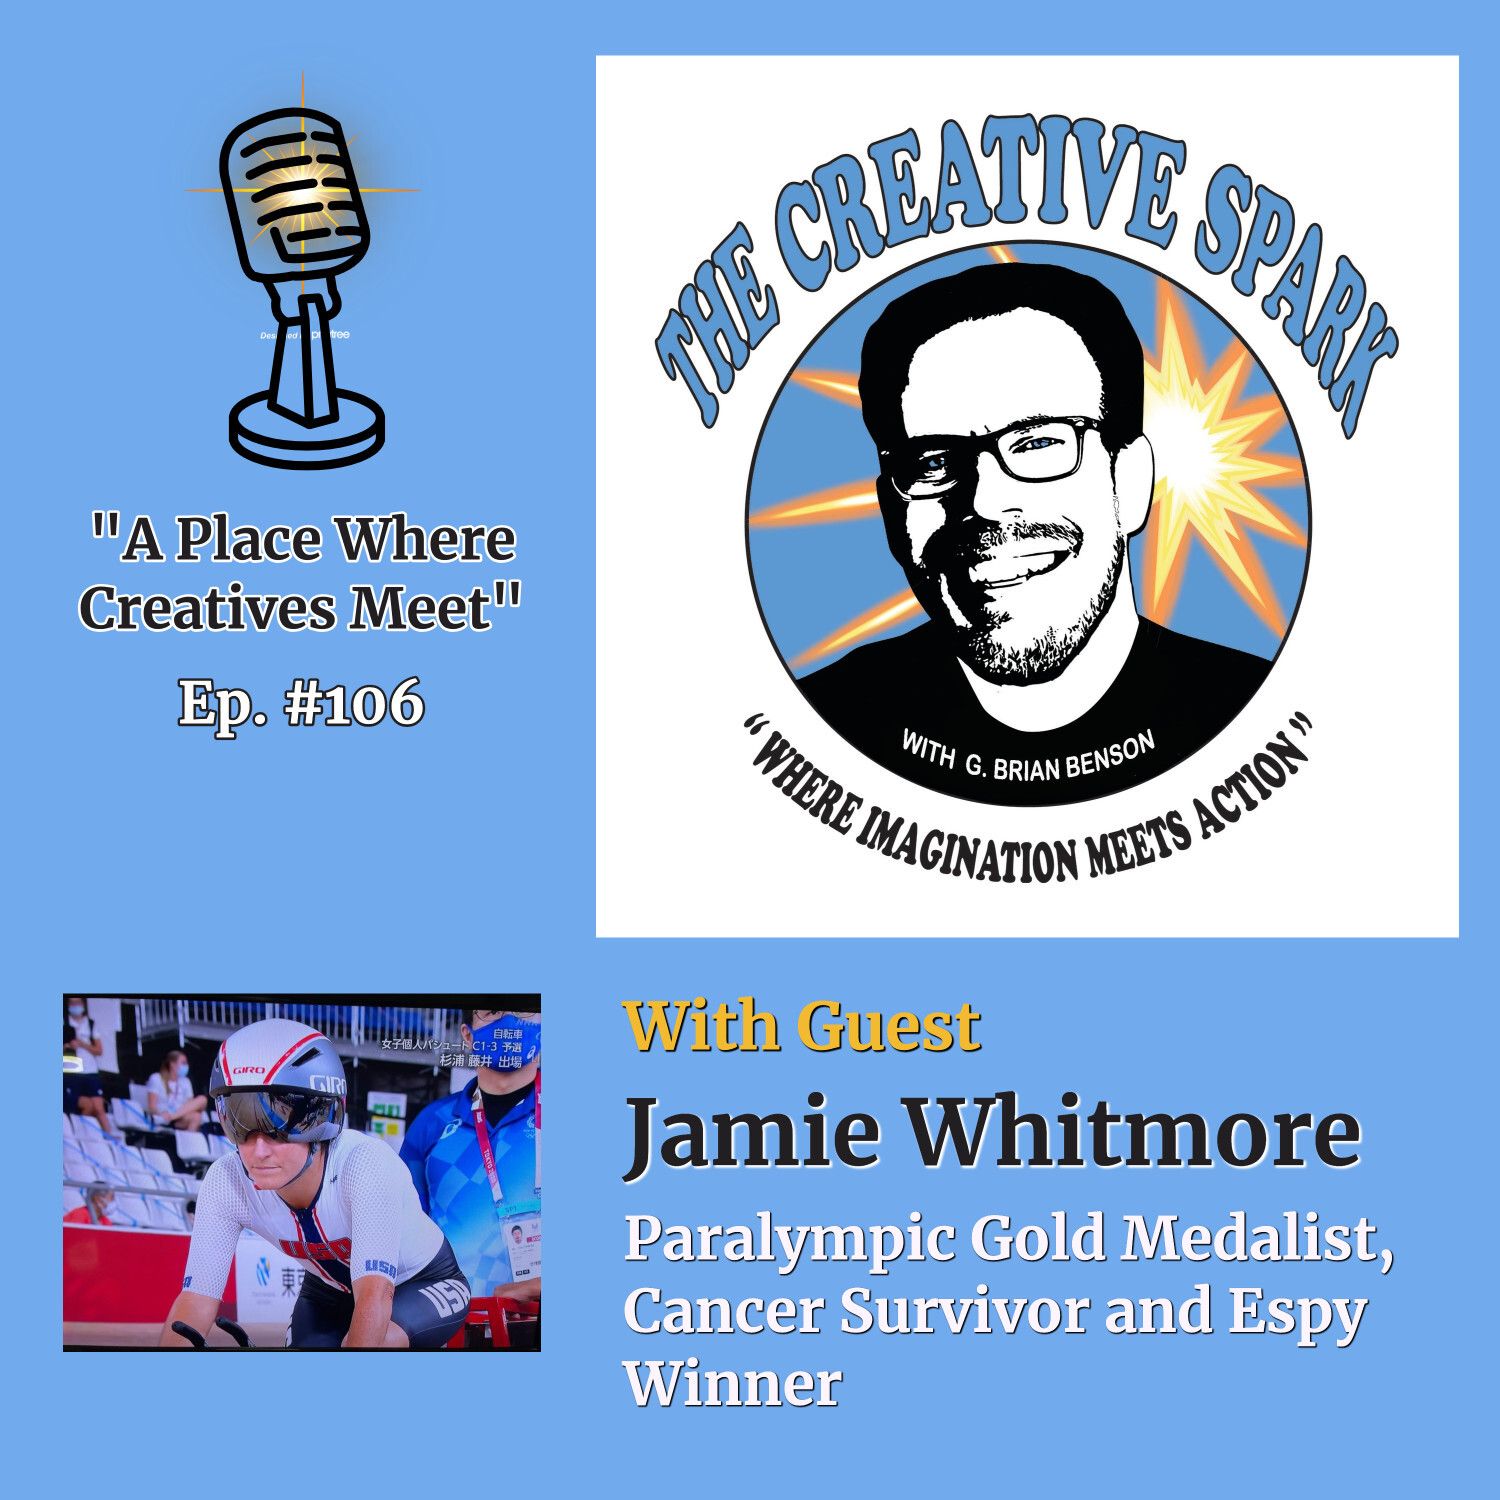 S1 Ep106: The Creative Spark Ep. 106 with Guest Jamie Whitmore